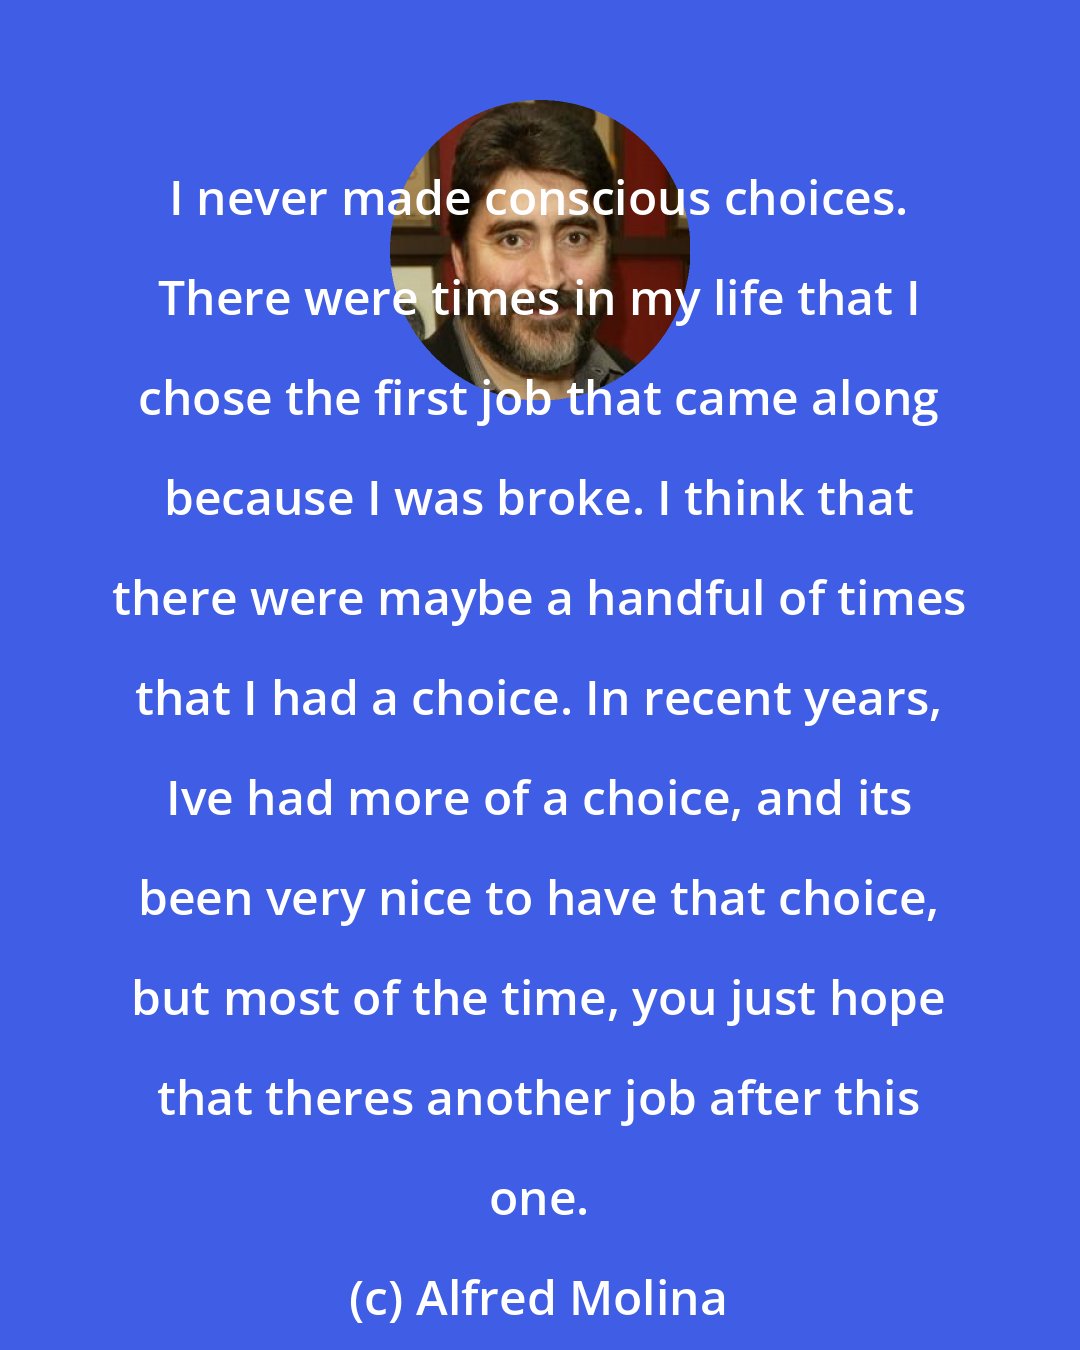 Alfred Molina: I never made conscious choices. There were times in my life that I chose the first job that came along because I was broke. I think that there were maybe a handful of times that I had a choice. In recent years, Ive had more of a choice, and its been very nice to have that choice, but most of the time, you just hope that theres another job after this one.